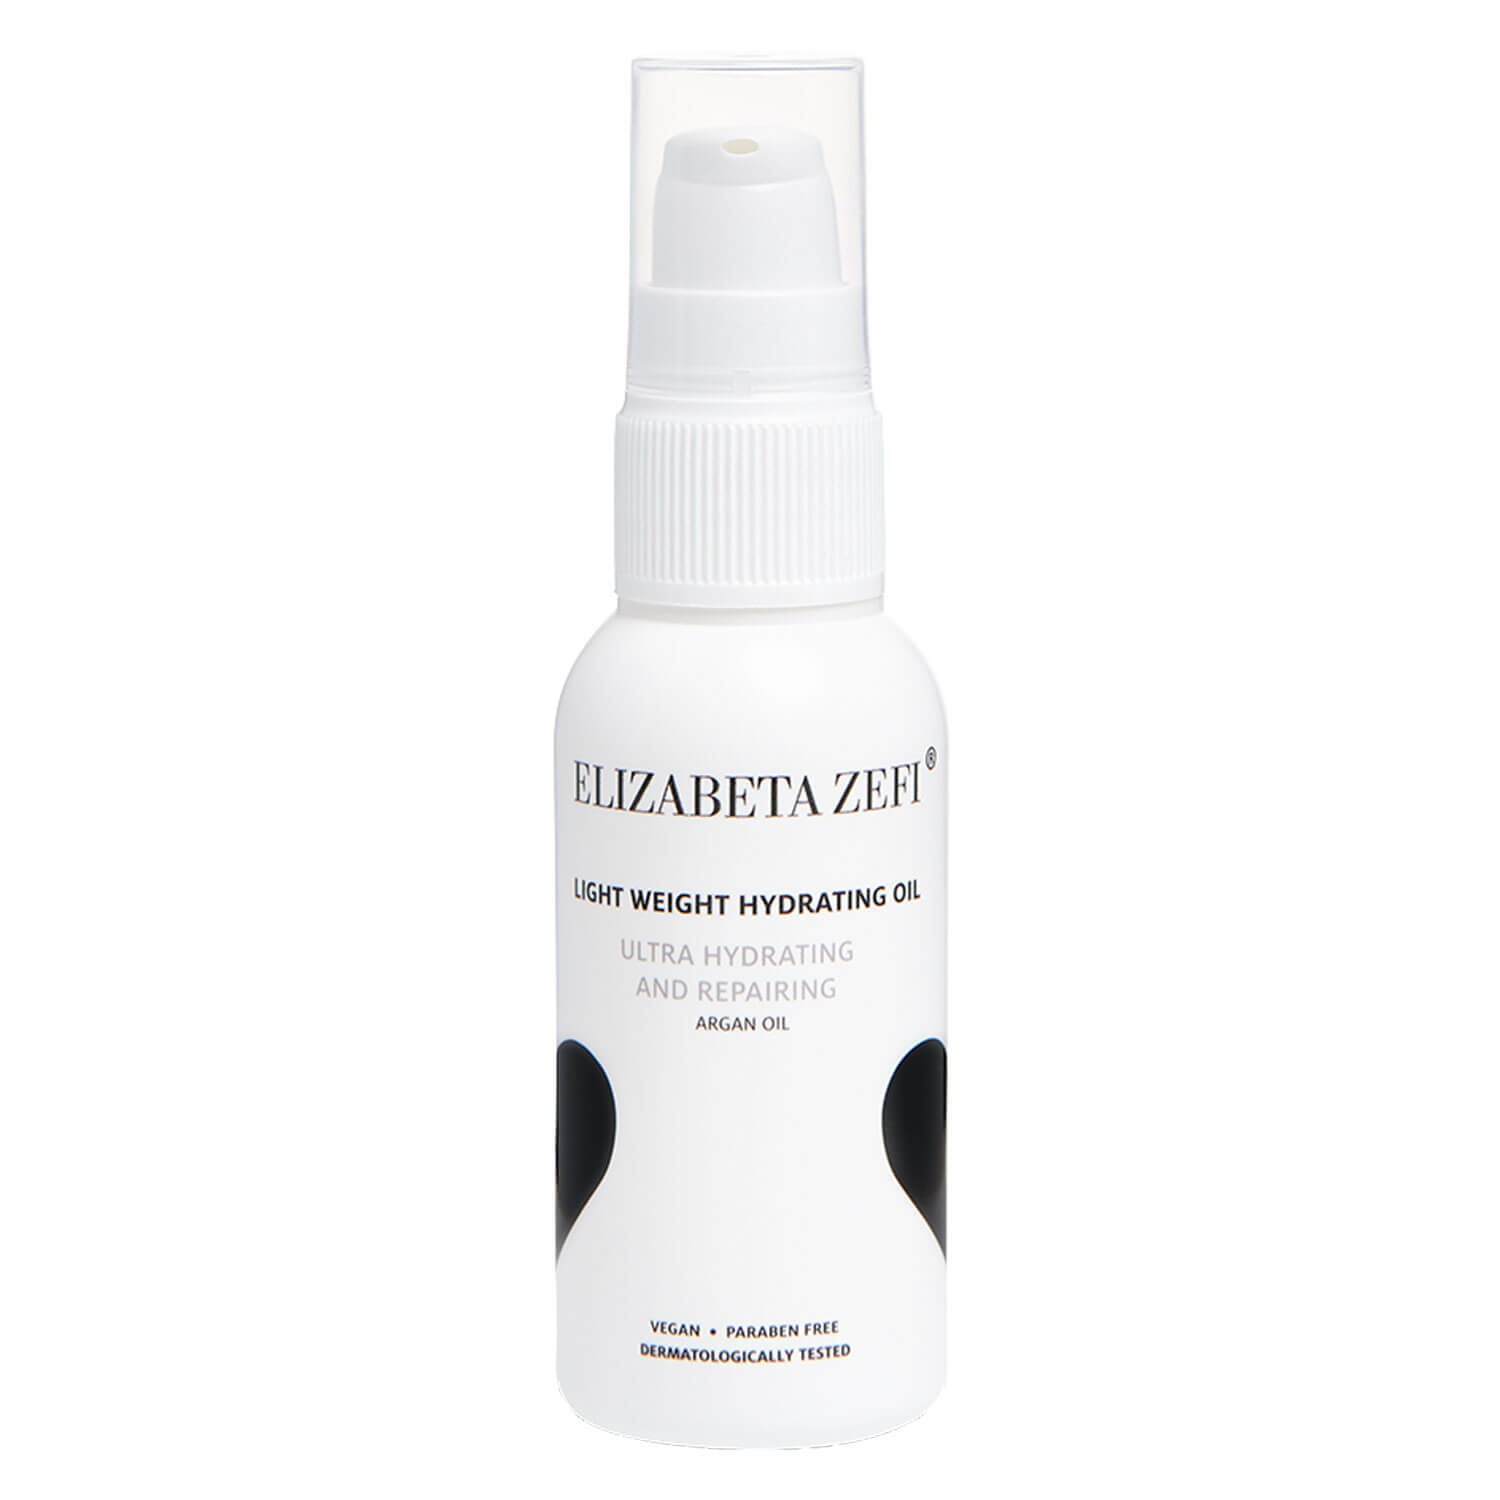 Product image from Elizabeta Zefi - Light Weight Hydrating Oil